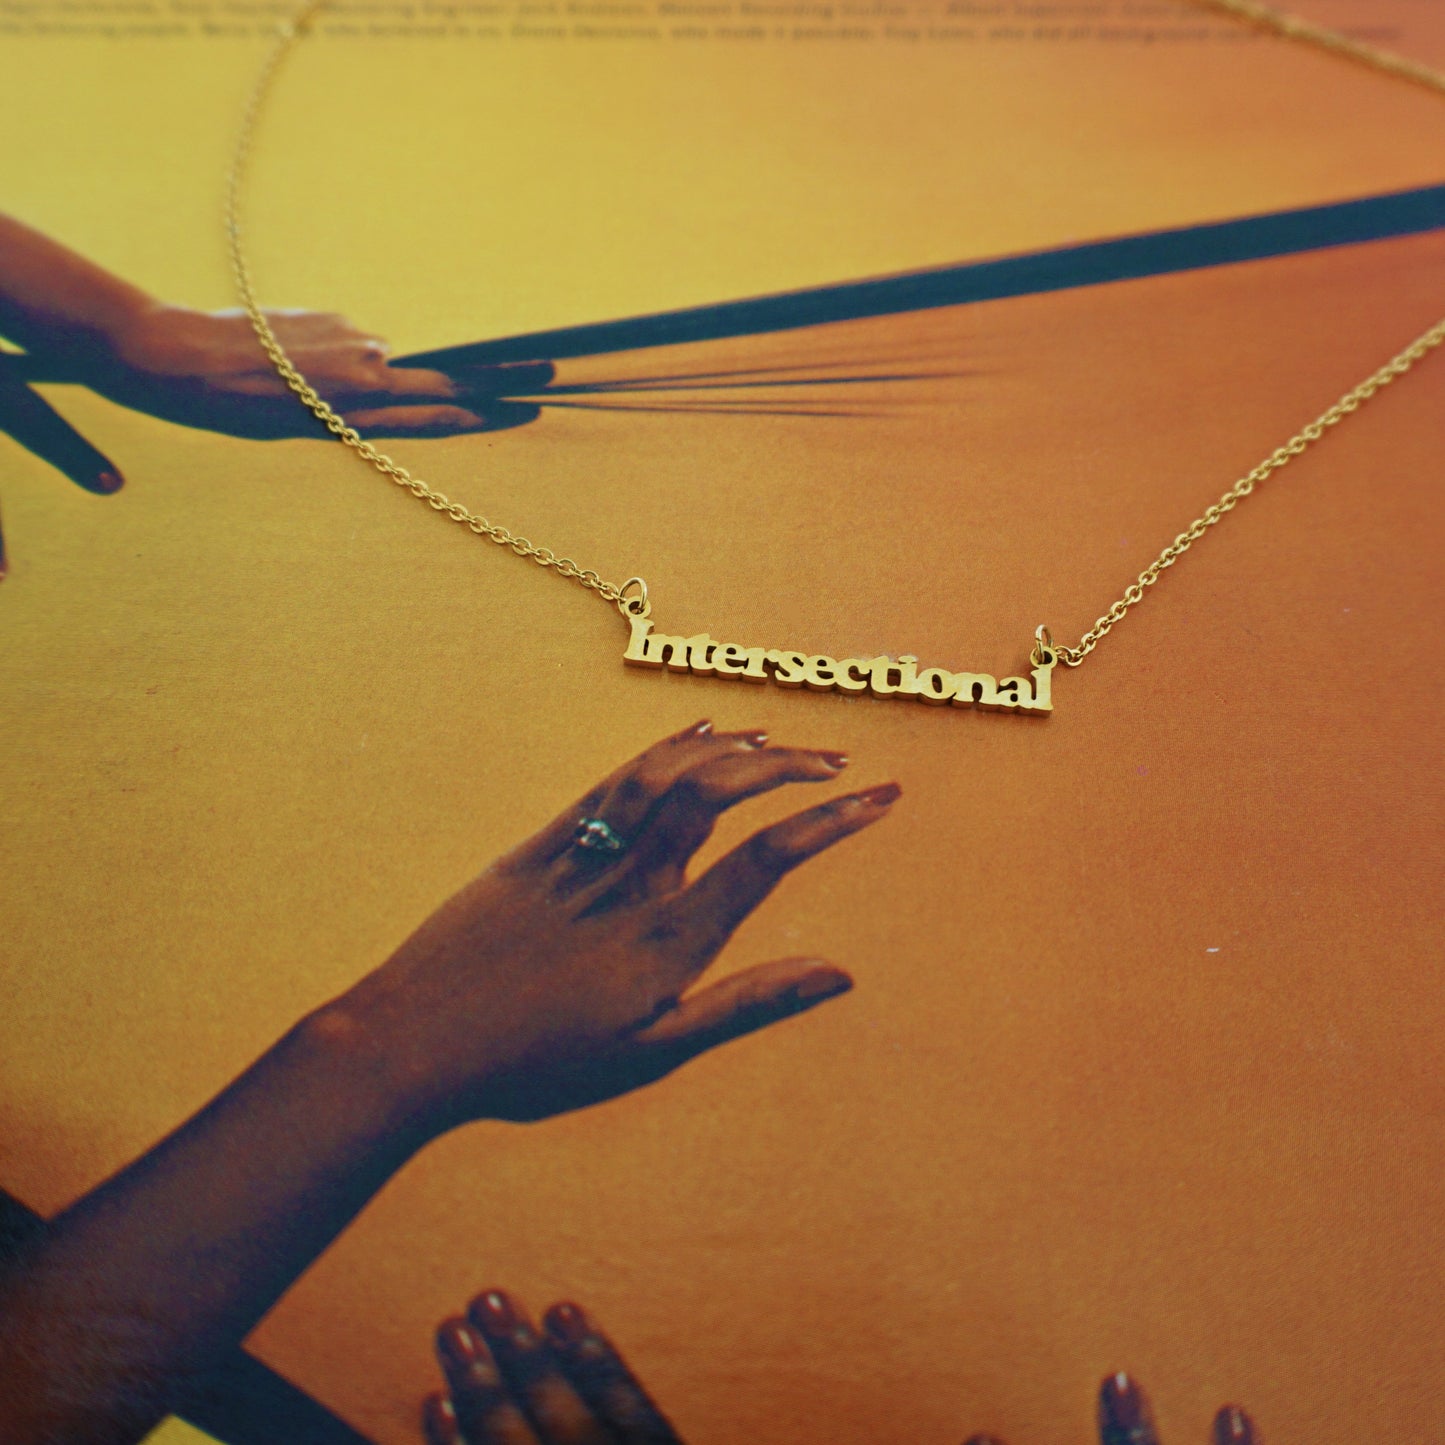 "Intersectional" Feminism 18K Gold Plated Necklace - Brownie Points for You